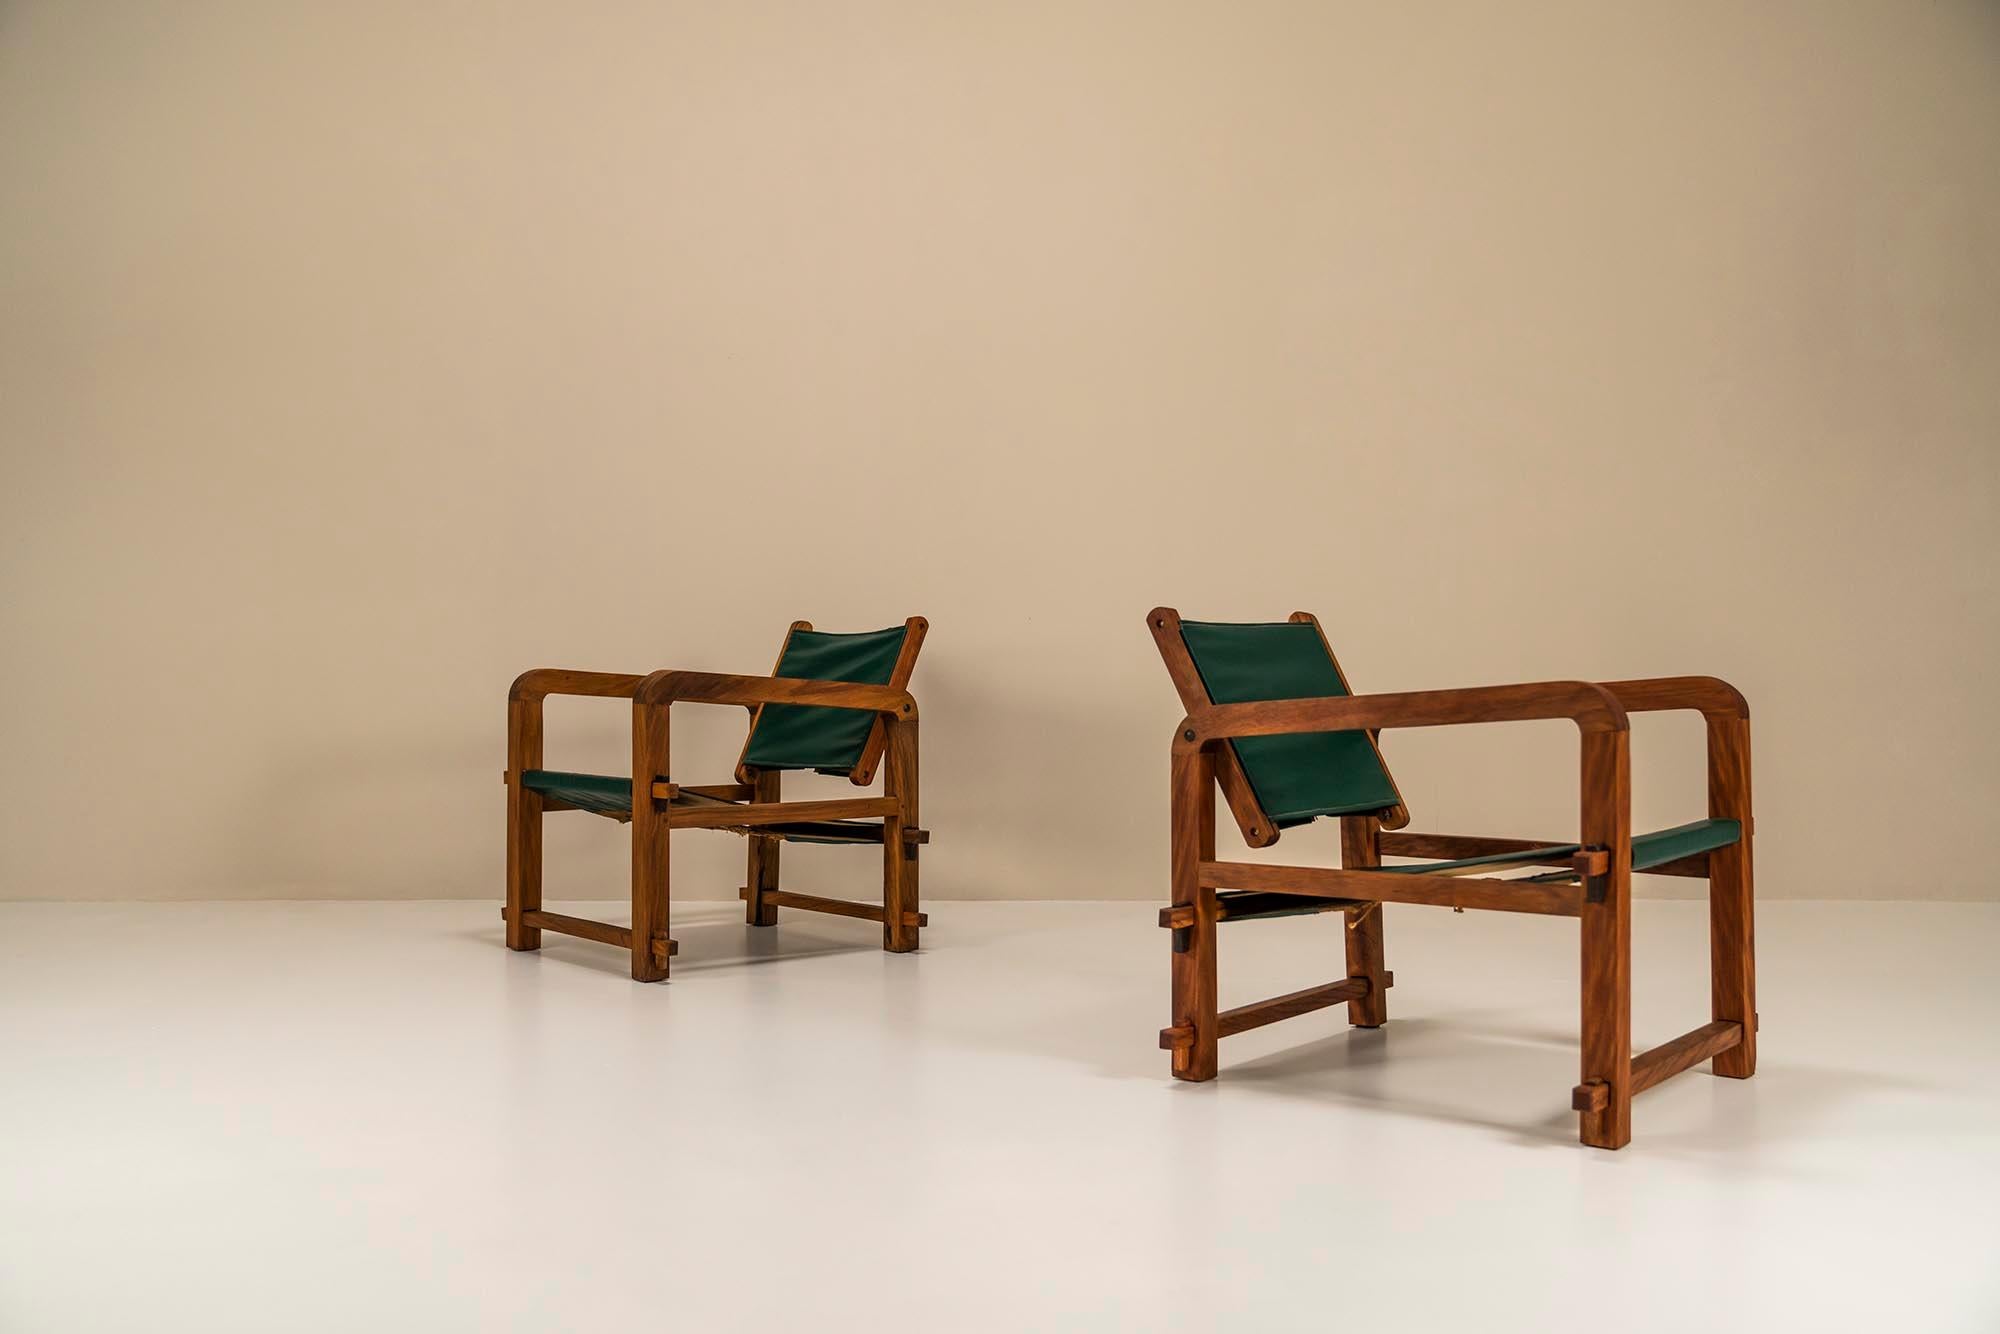 Brazilian Set Of 2 Sling Chairs In Mahogany And Leather, Brazil 1960s